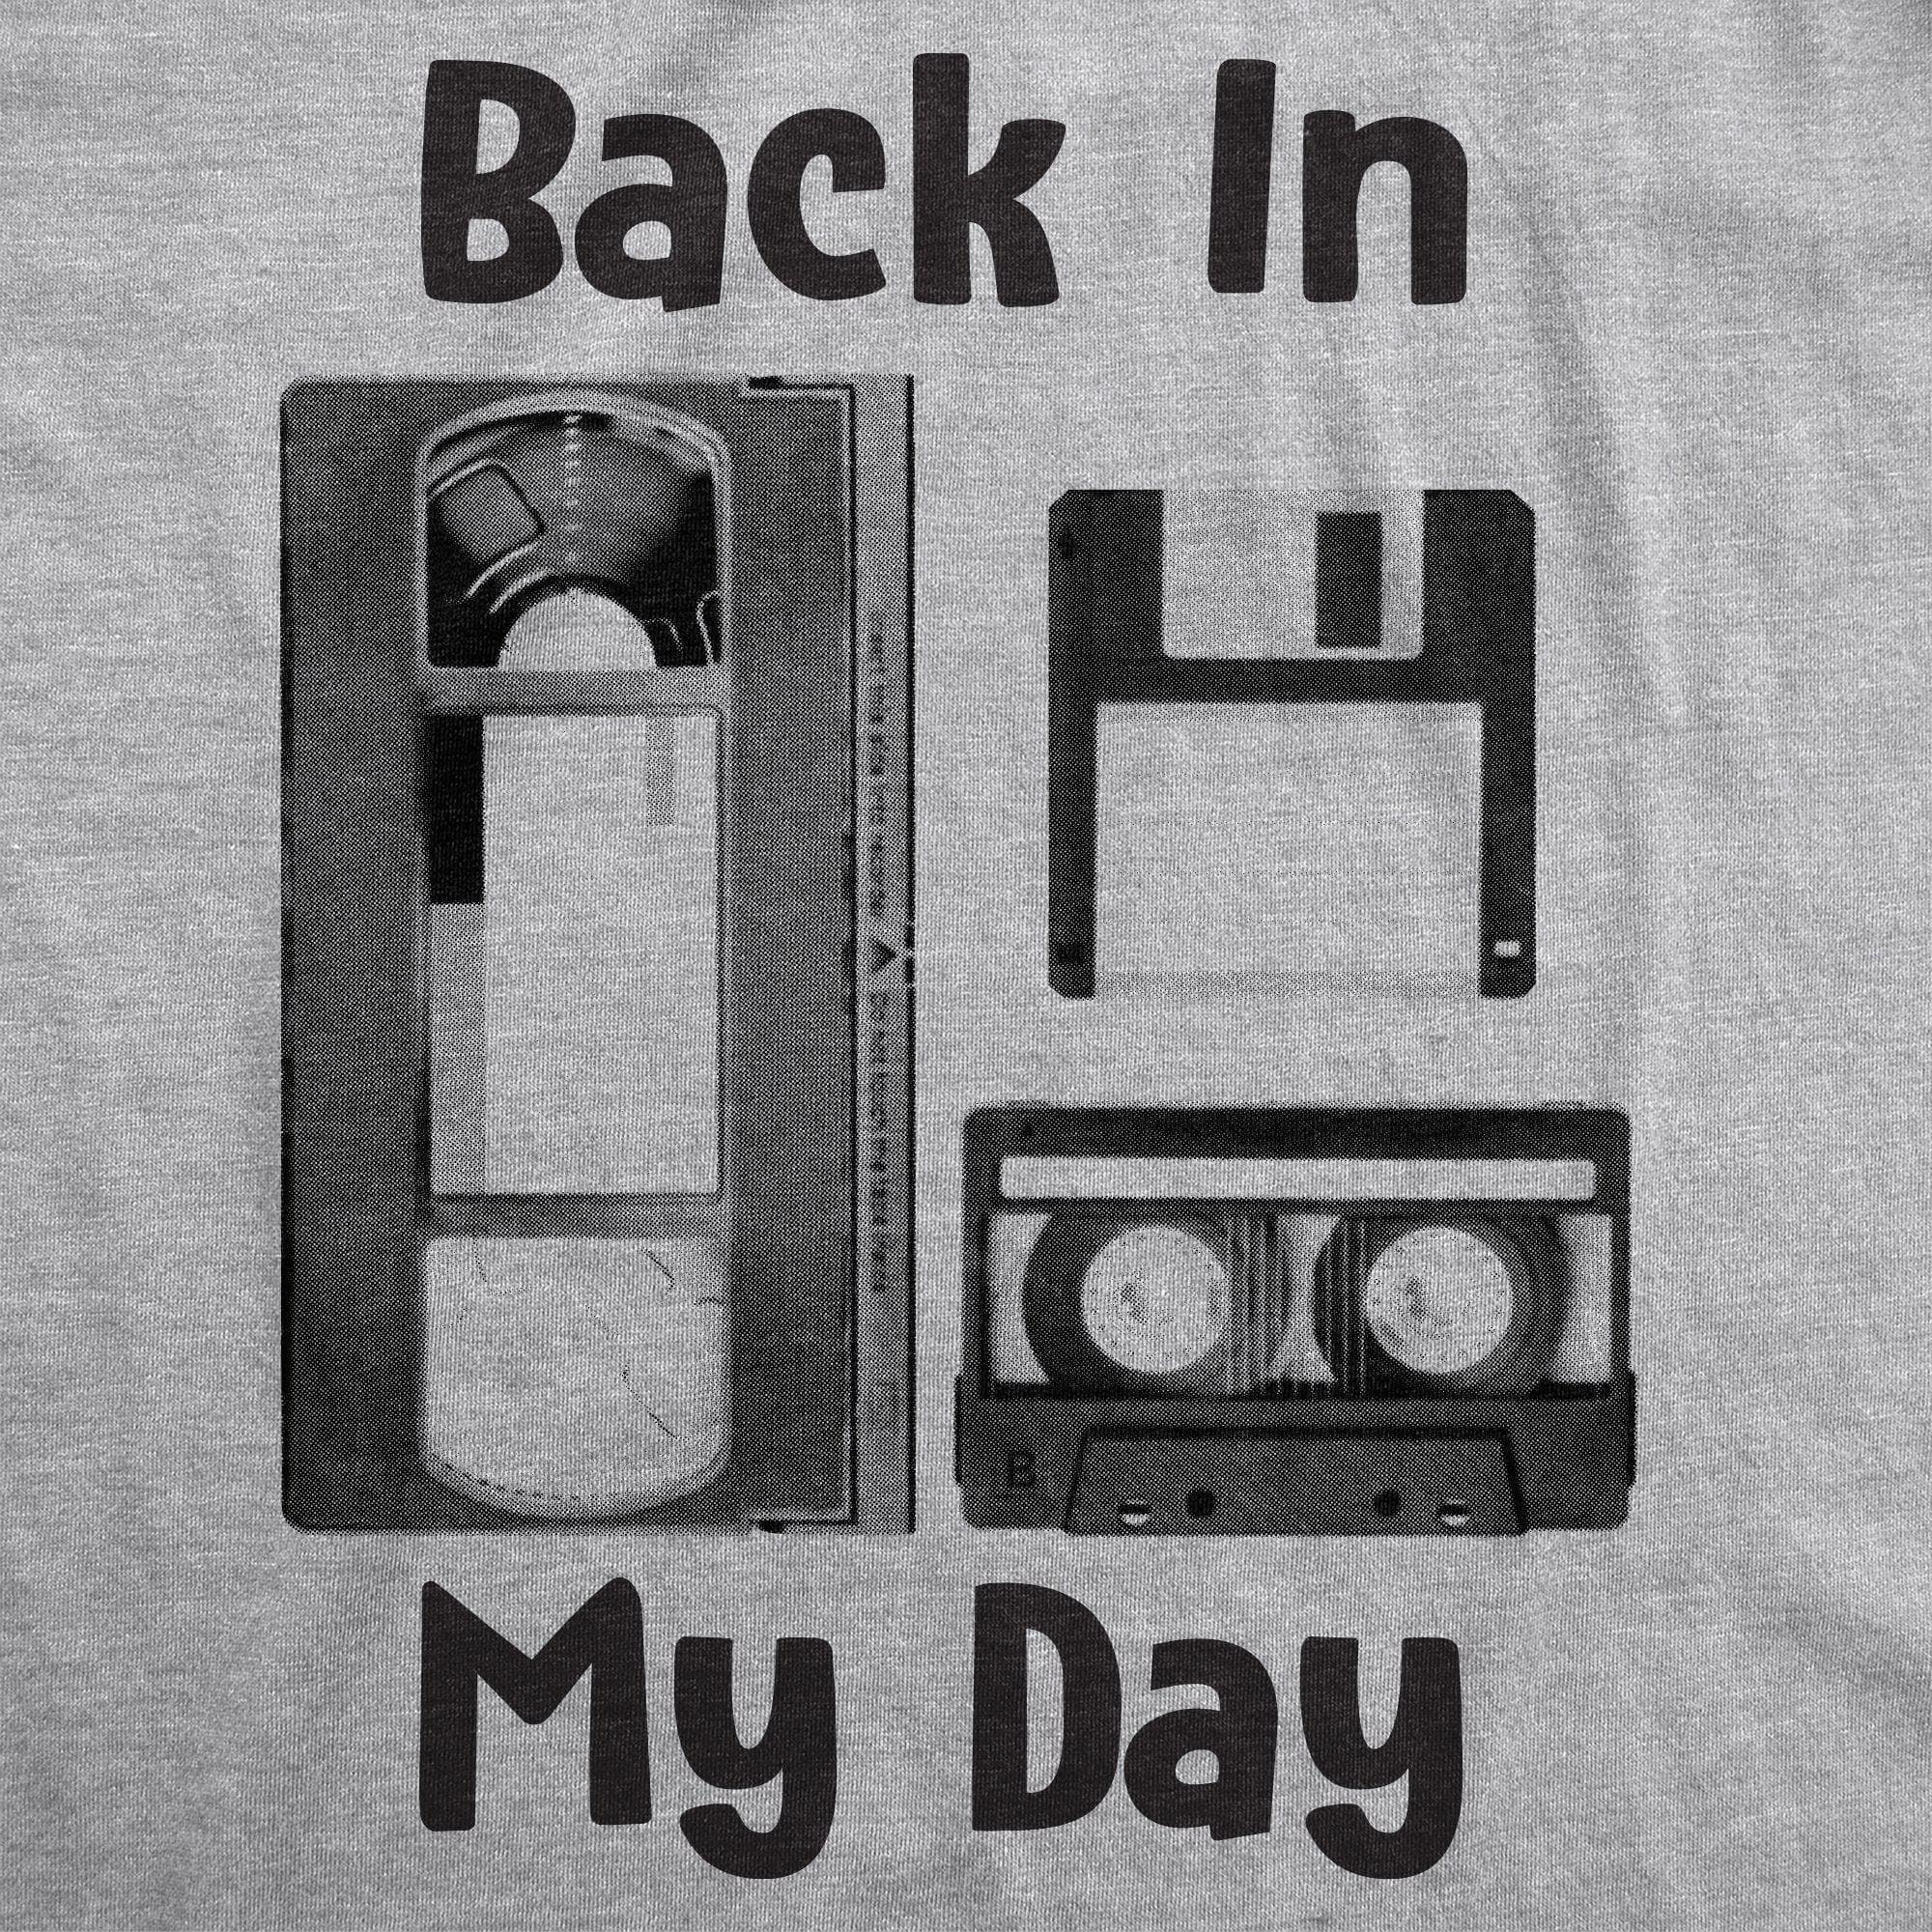 Back In My Day Men's Tshirt - Crazy Dog T-Shirts